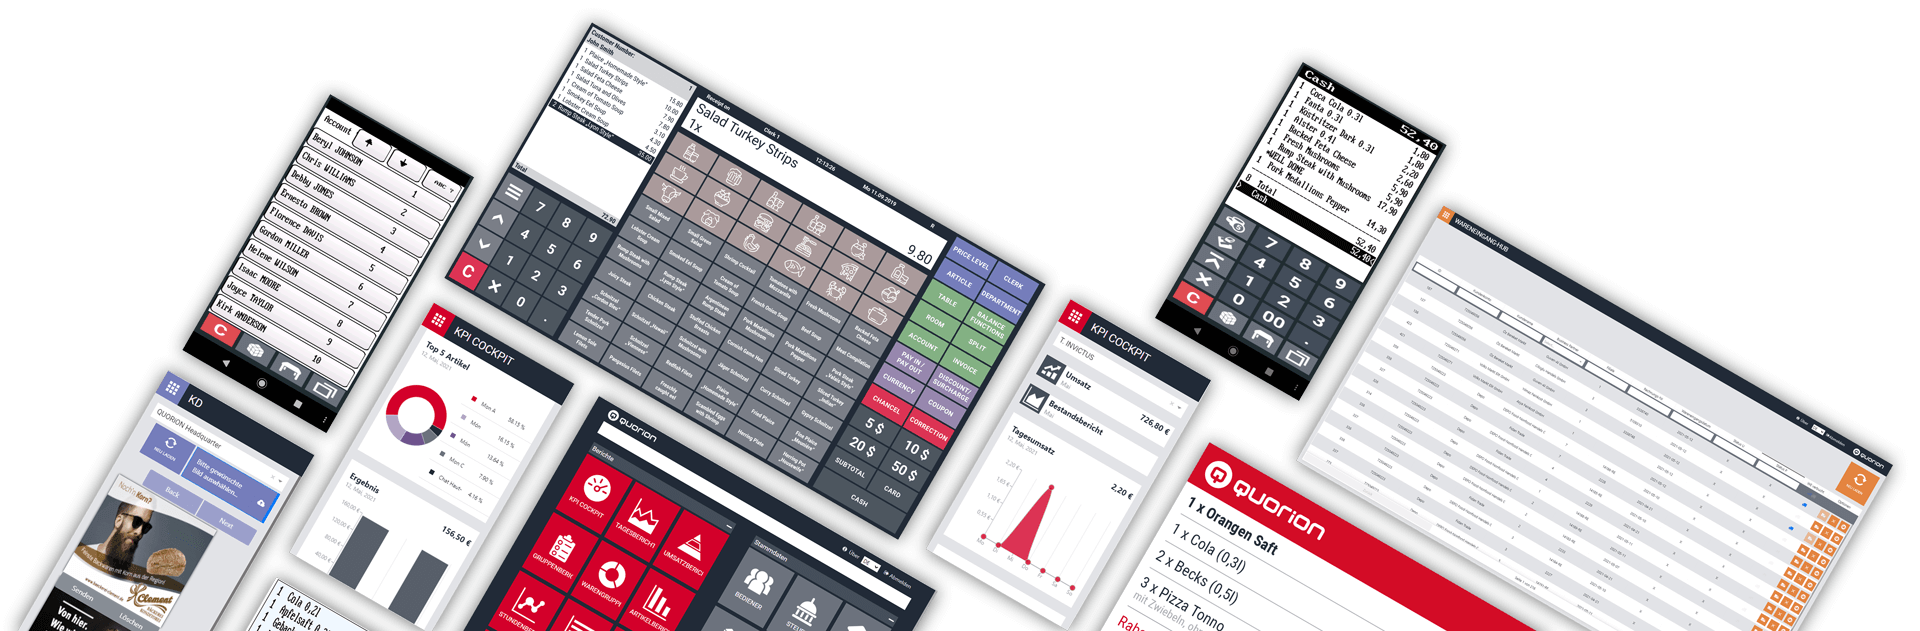 QMP POS software for desktop and mobile devices.